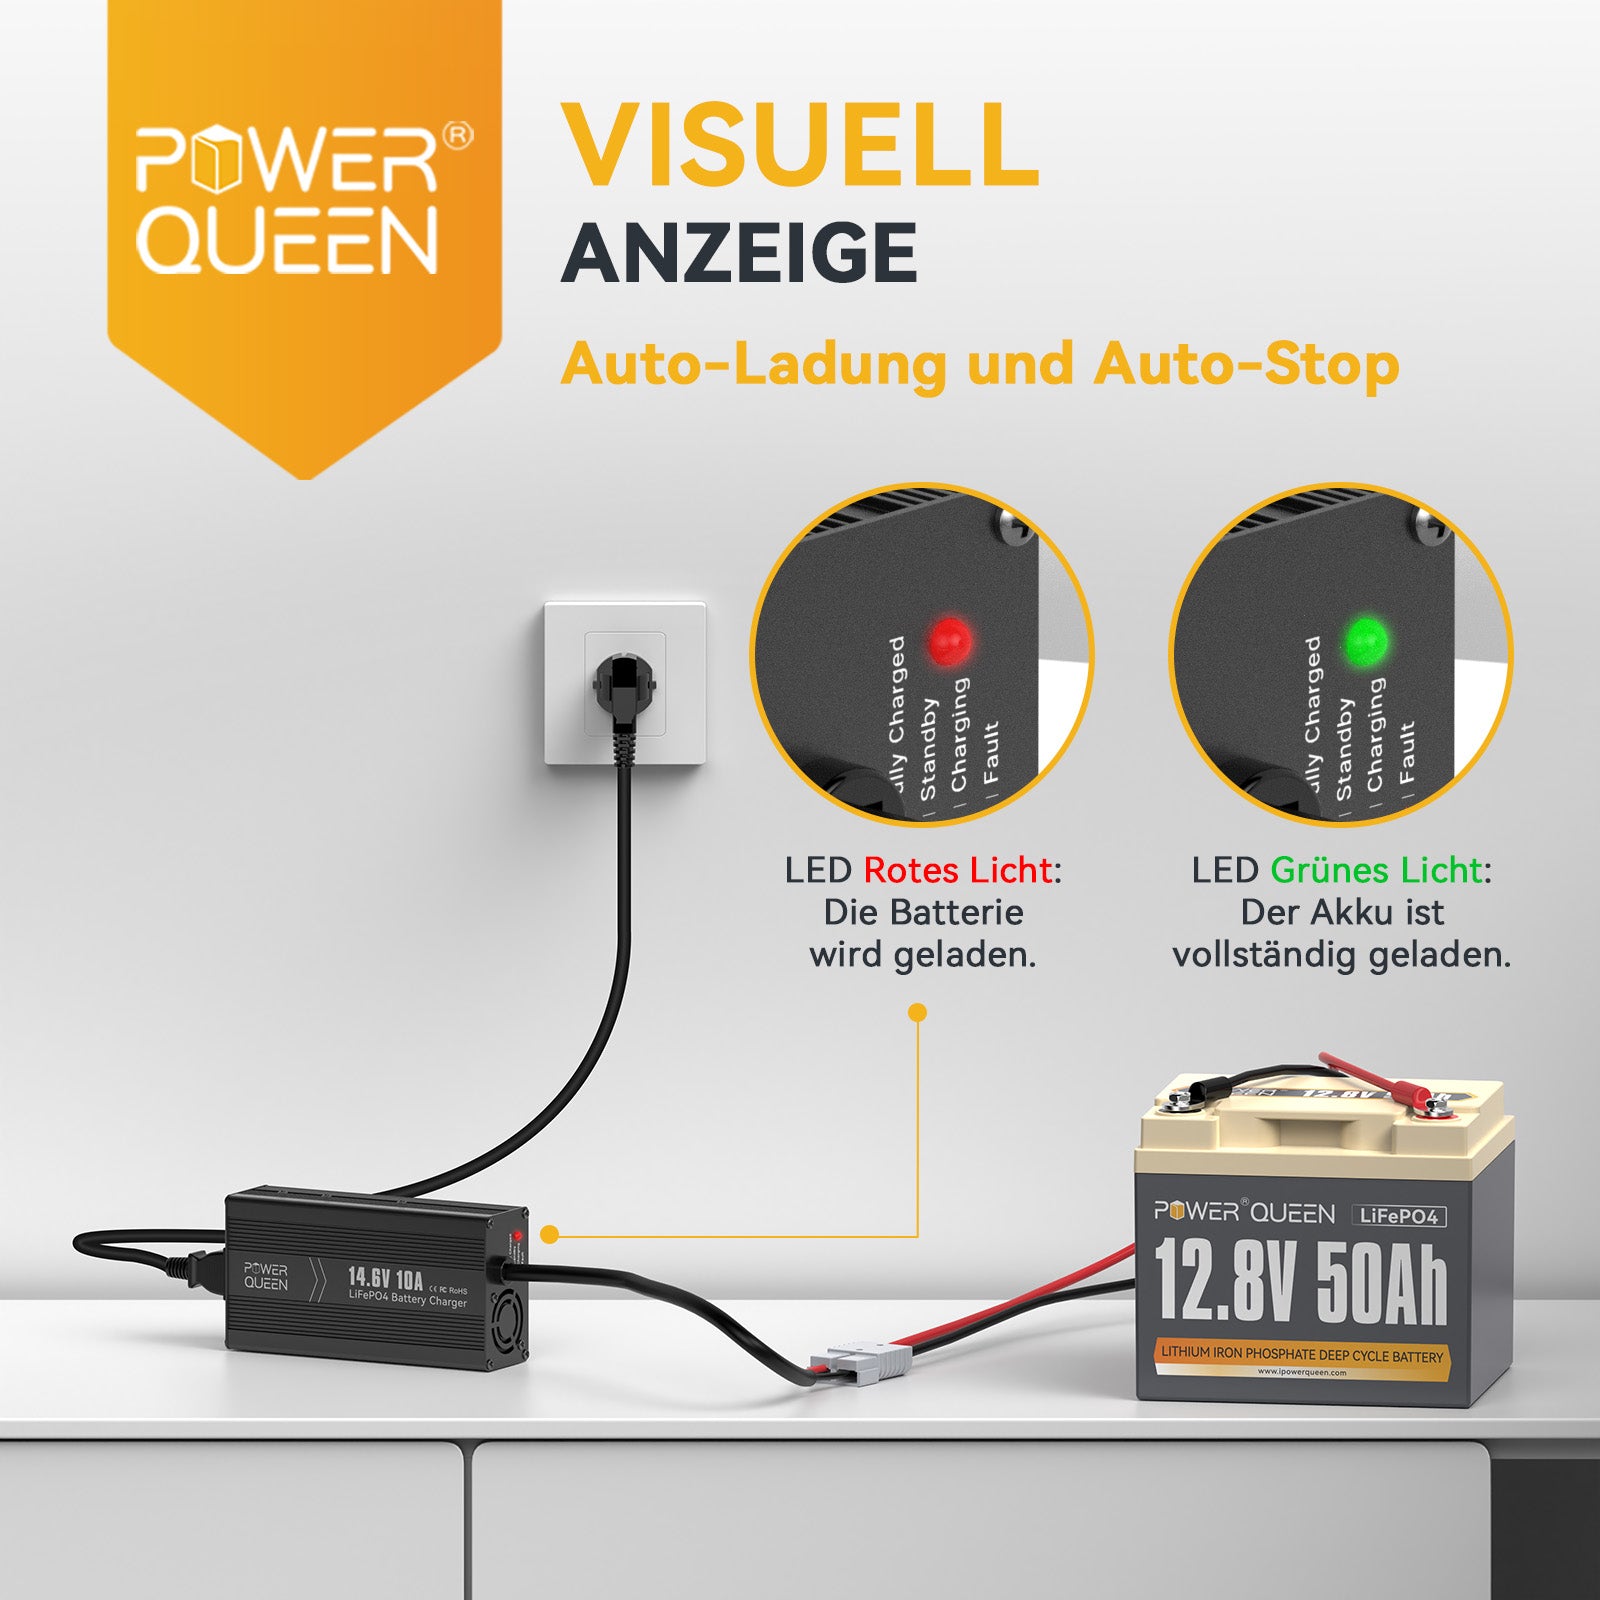 Power Queen 14.6V 10A LiFePO4 charger for 12V LiFePO4 battery